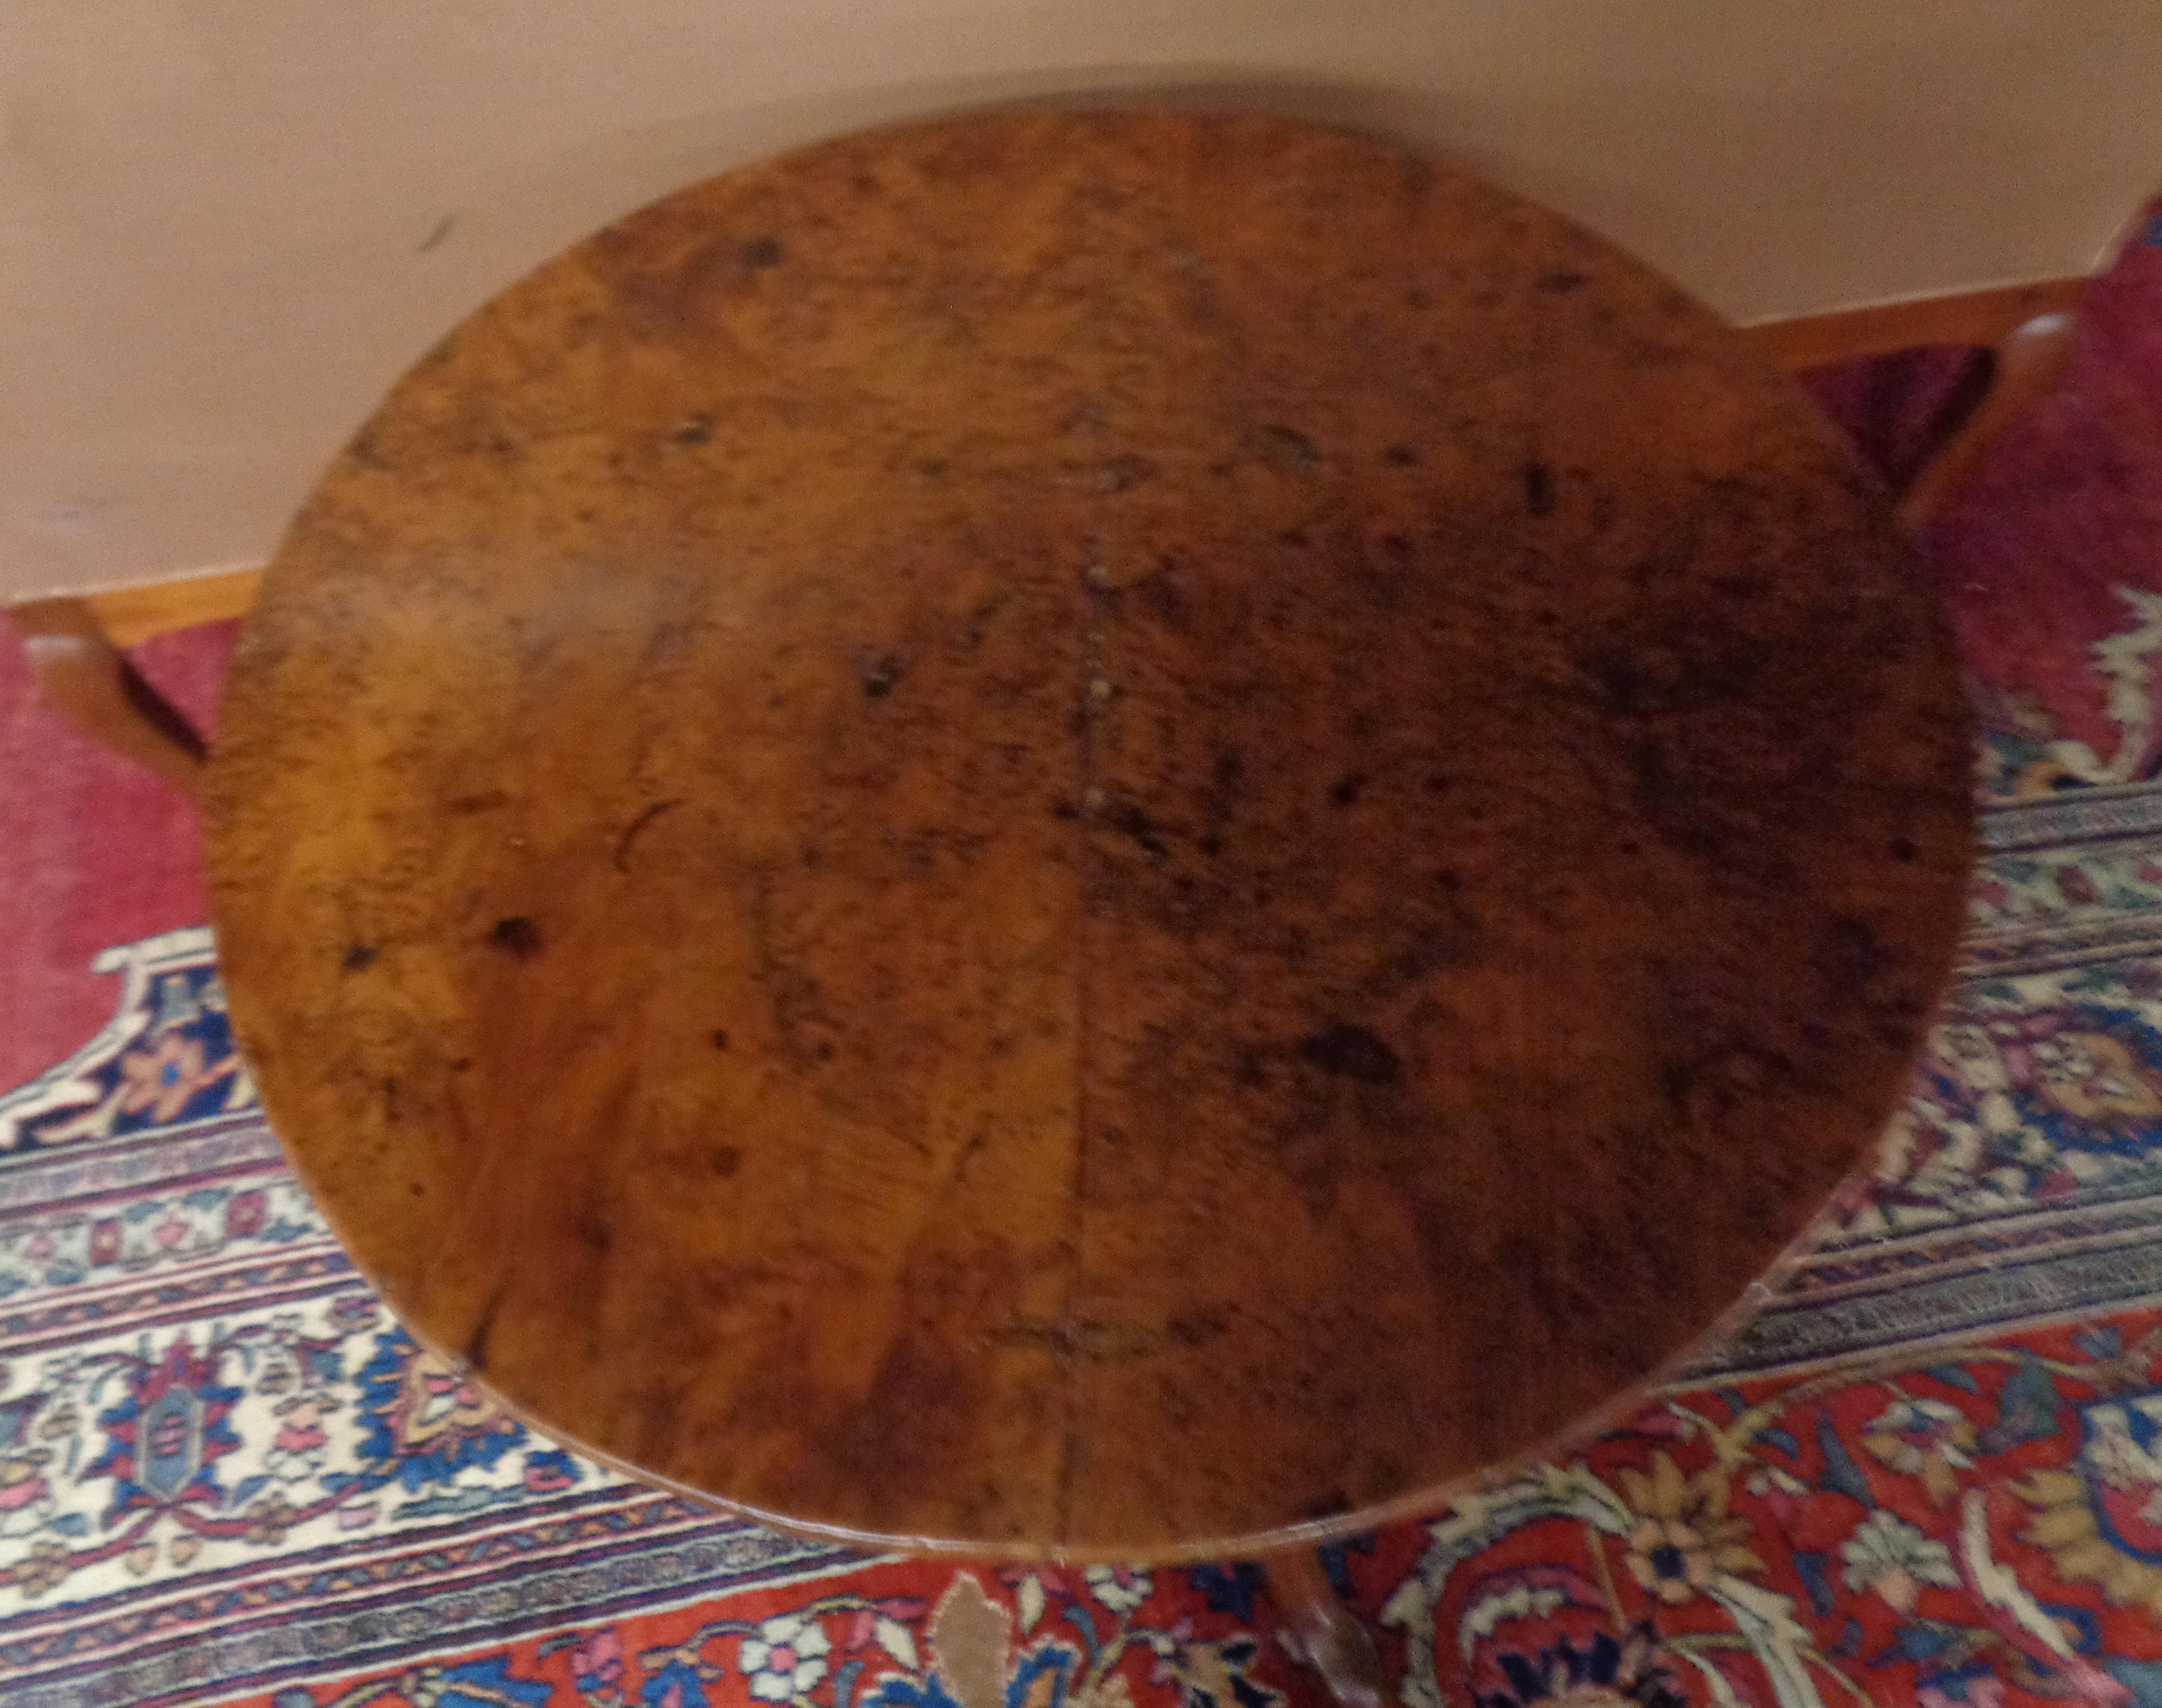 Rare English burled yew wood circular tripod table with a pedestal base. The table has a solid yew wood turned pedestal base with three yew wood feet. It is very rare to have a burled and solid tripod table. It has very rich color and patina, circa